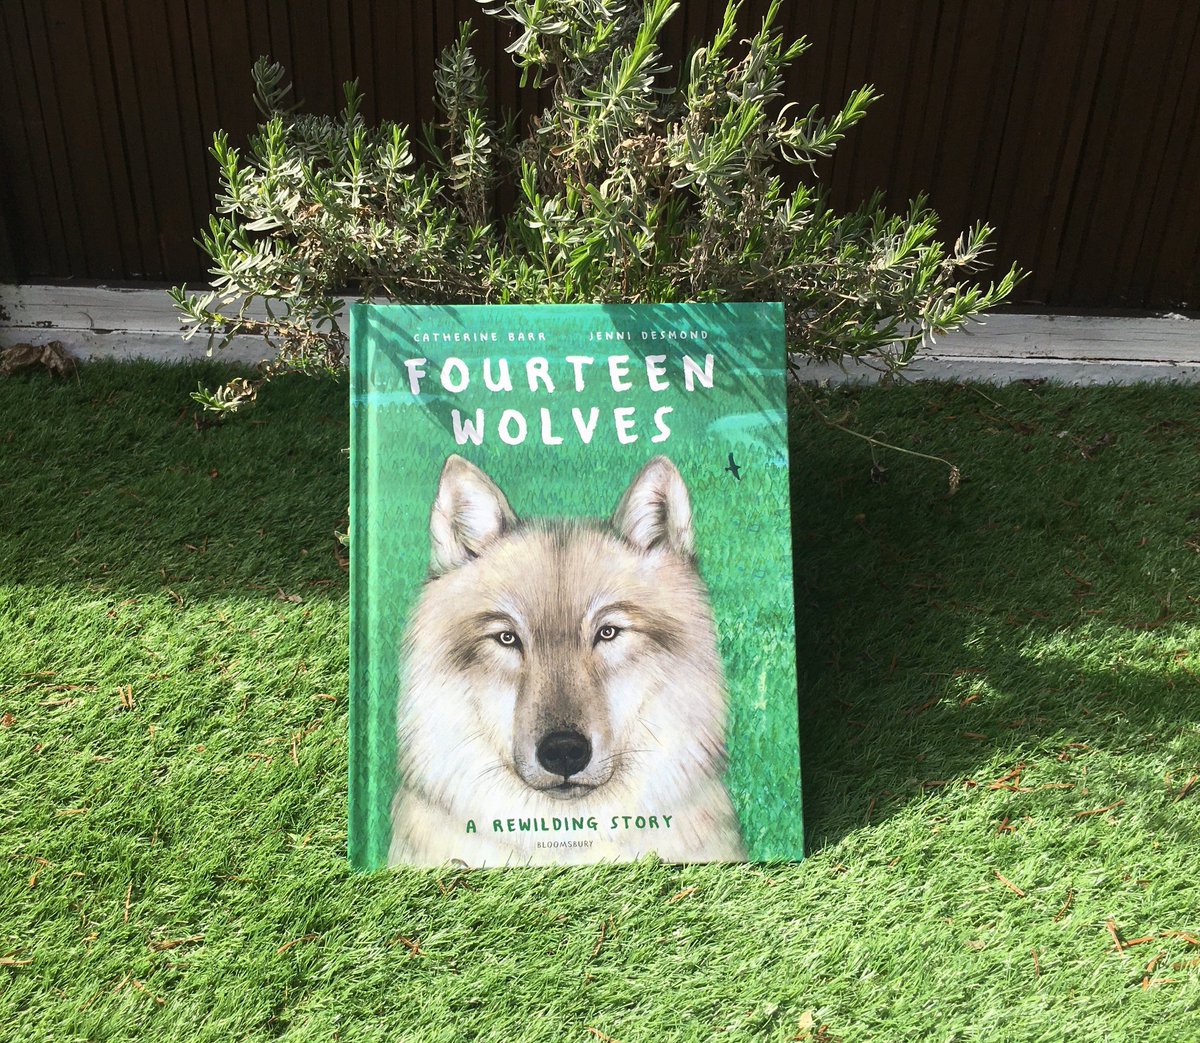 Fourteen Wolves written by  @catherine_barr and illustrated by Jenni Desmond tells the inspiring true story of how wolves returned to Yellowstone Park in 1995. Out now from  @KidsBloomsbury!